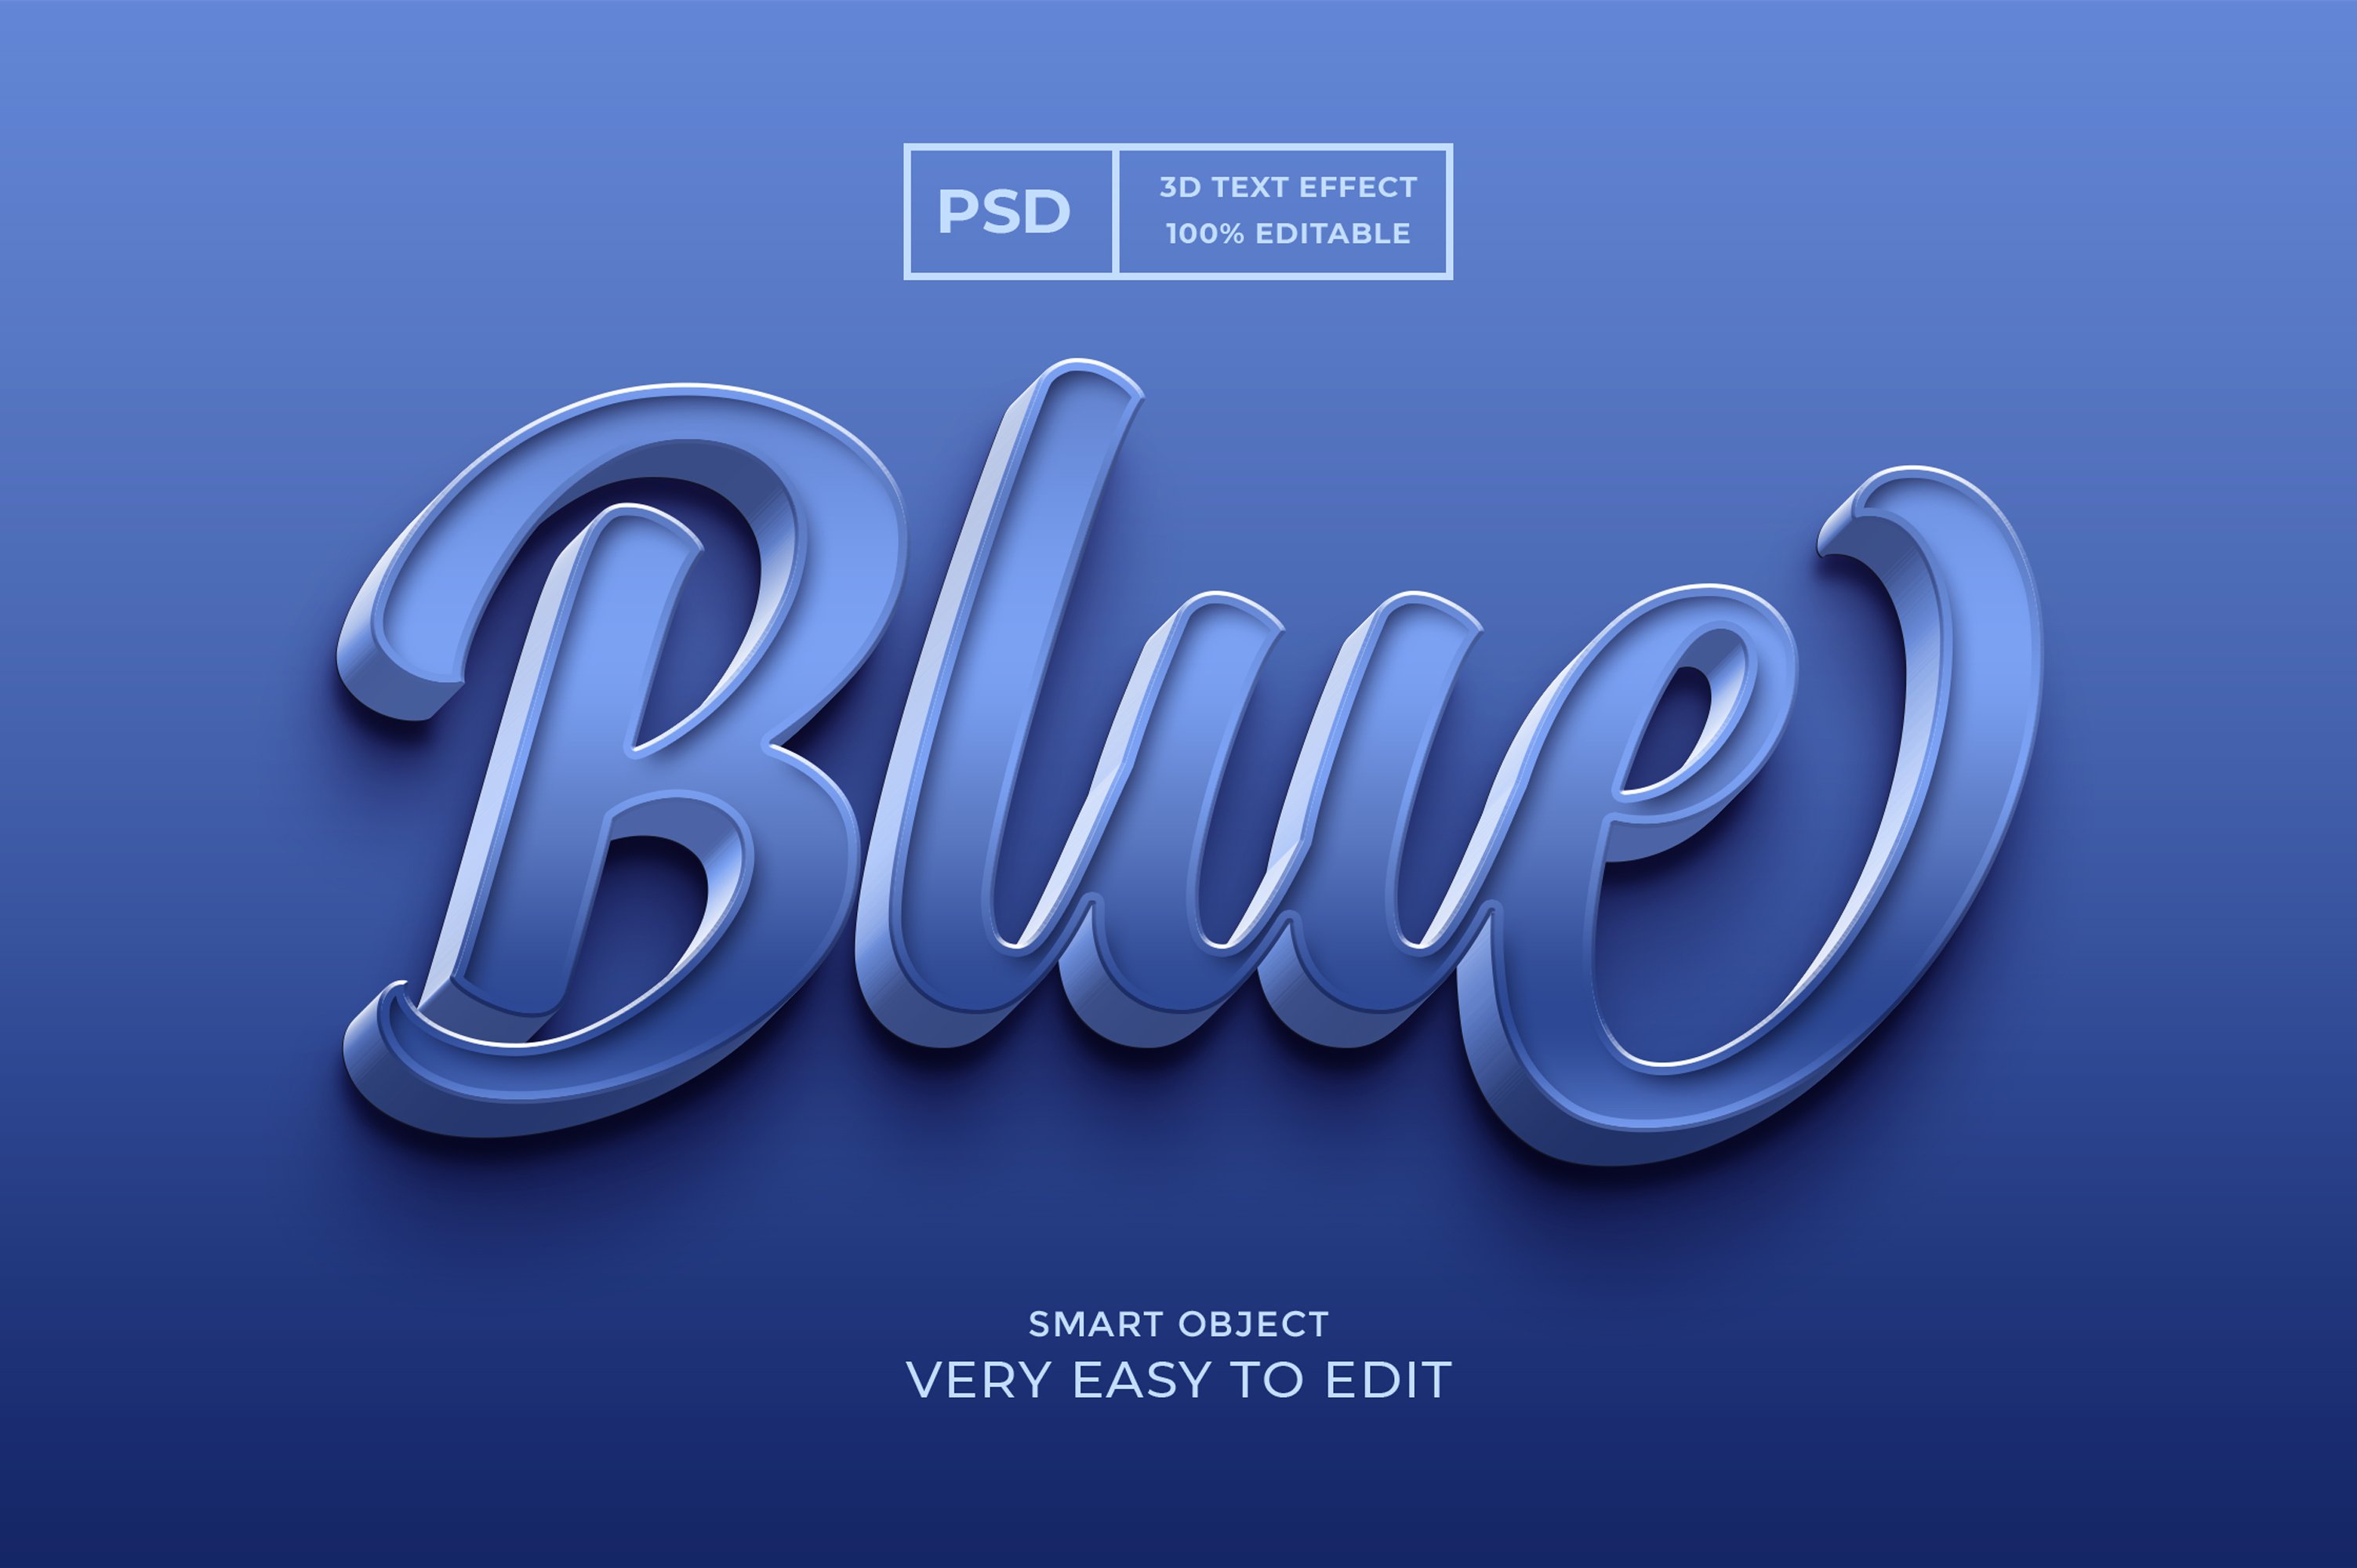 Blue 3d text style effect psdcover image.